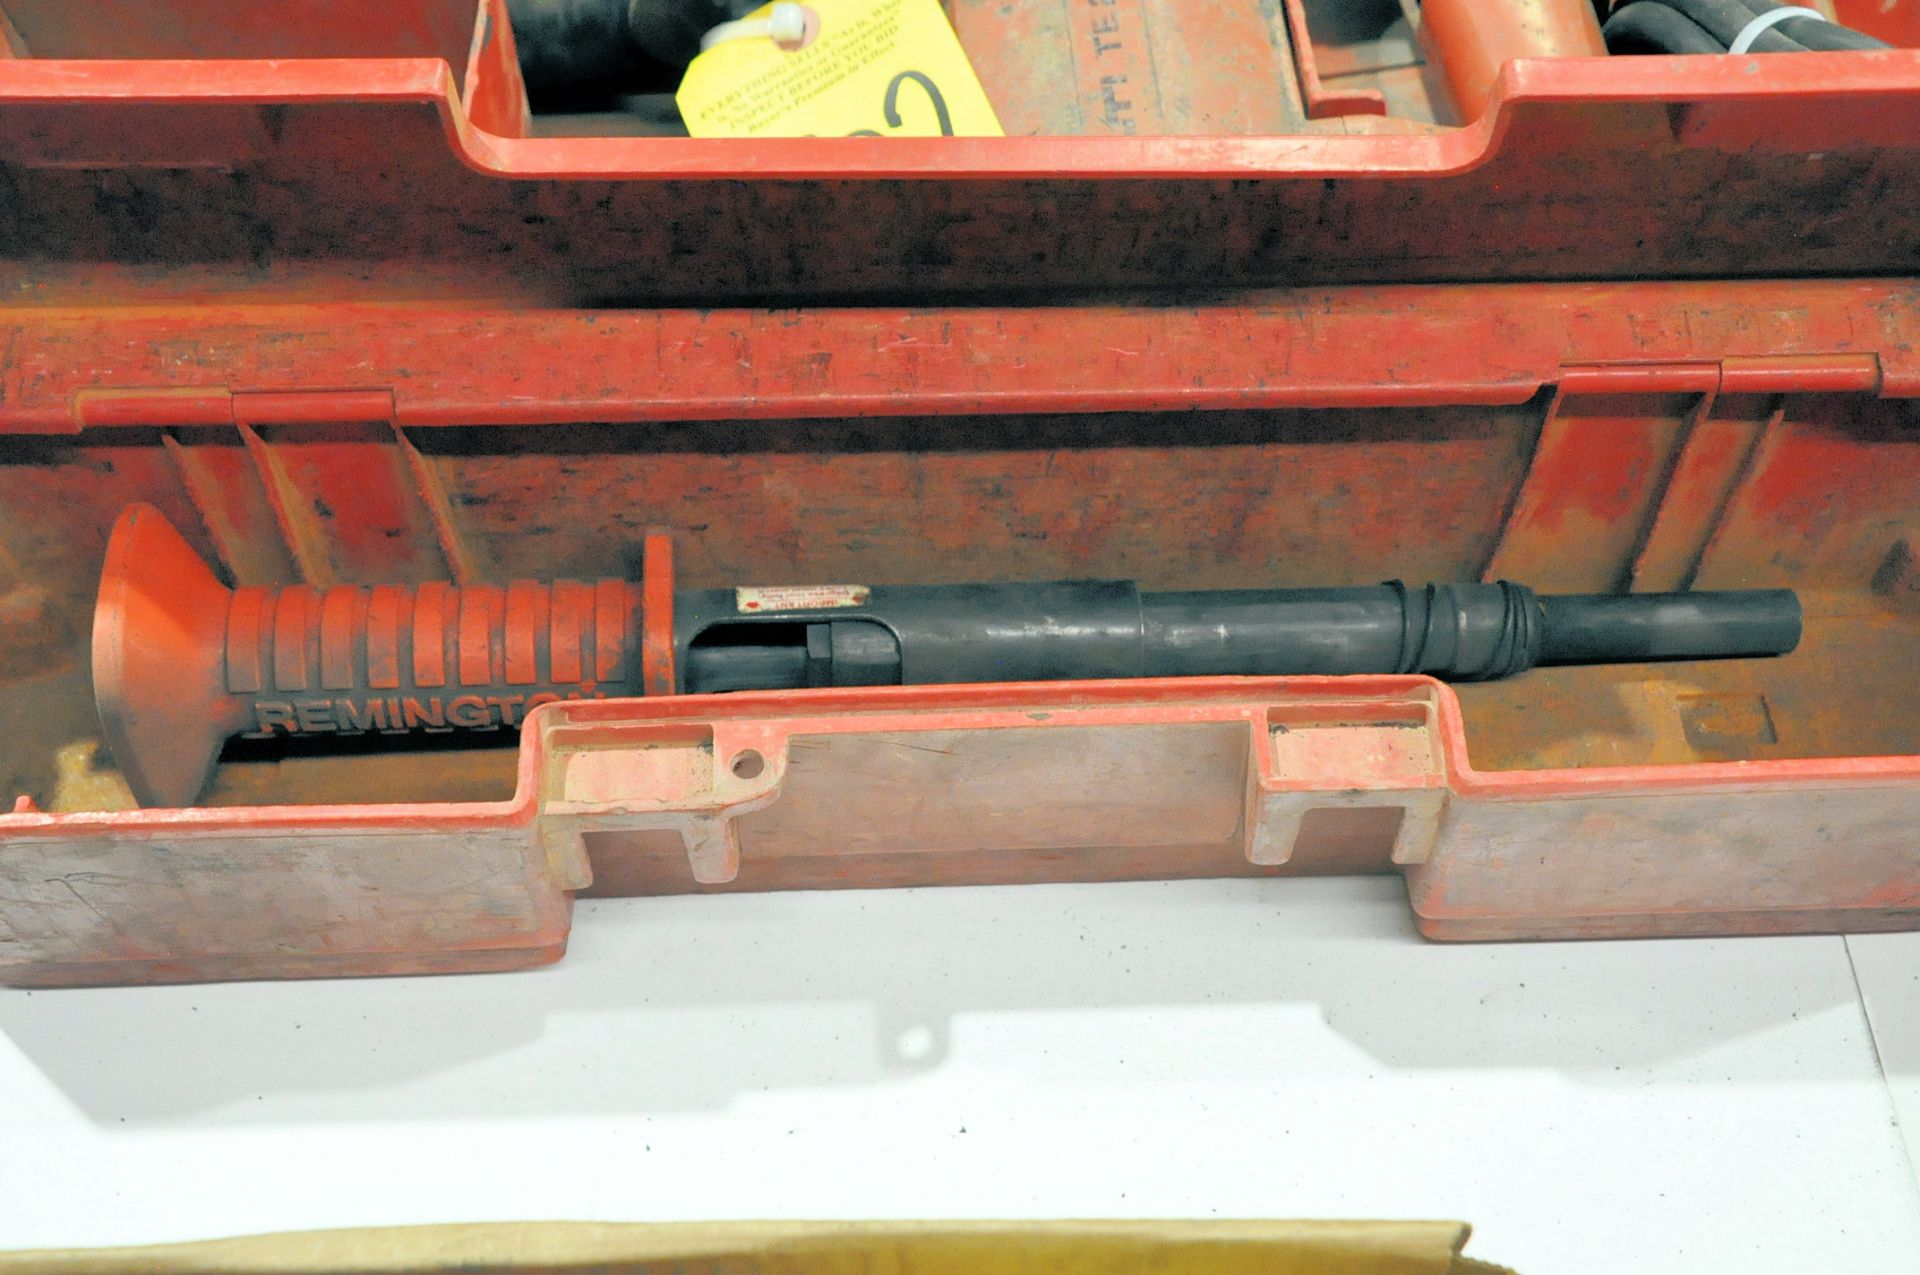 Hilti TE22 Rotary Hammer Drill with Case - Image 2 of 2